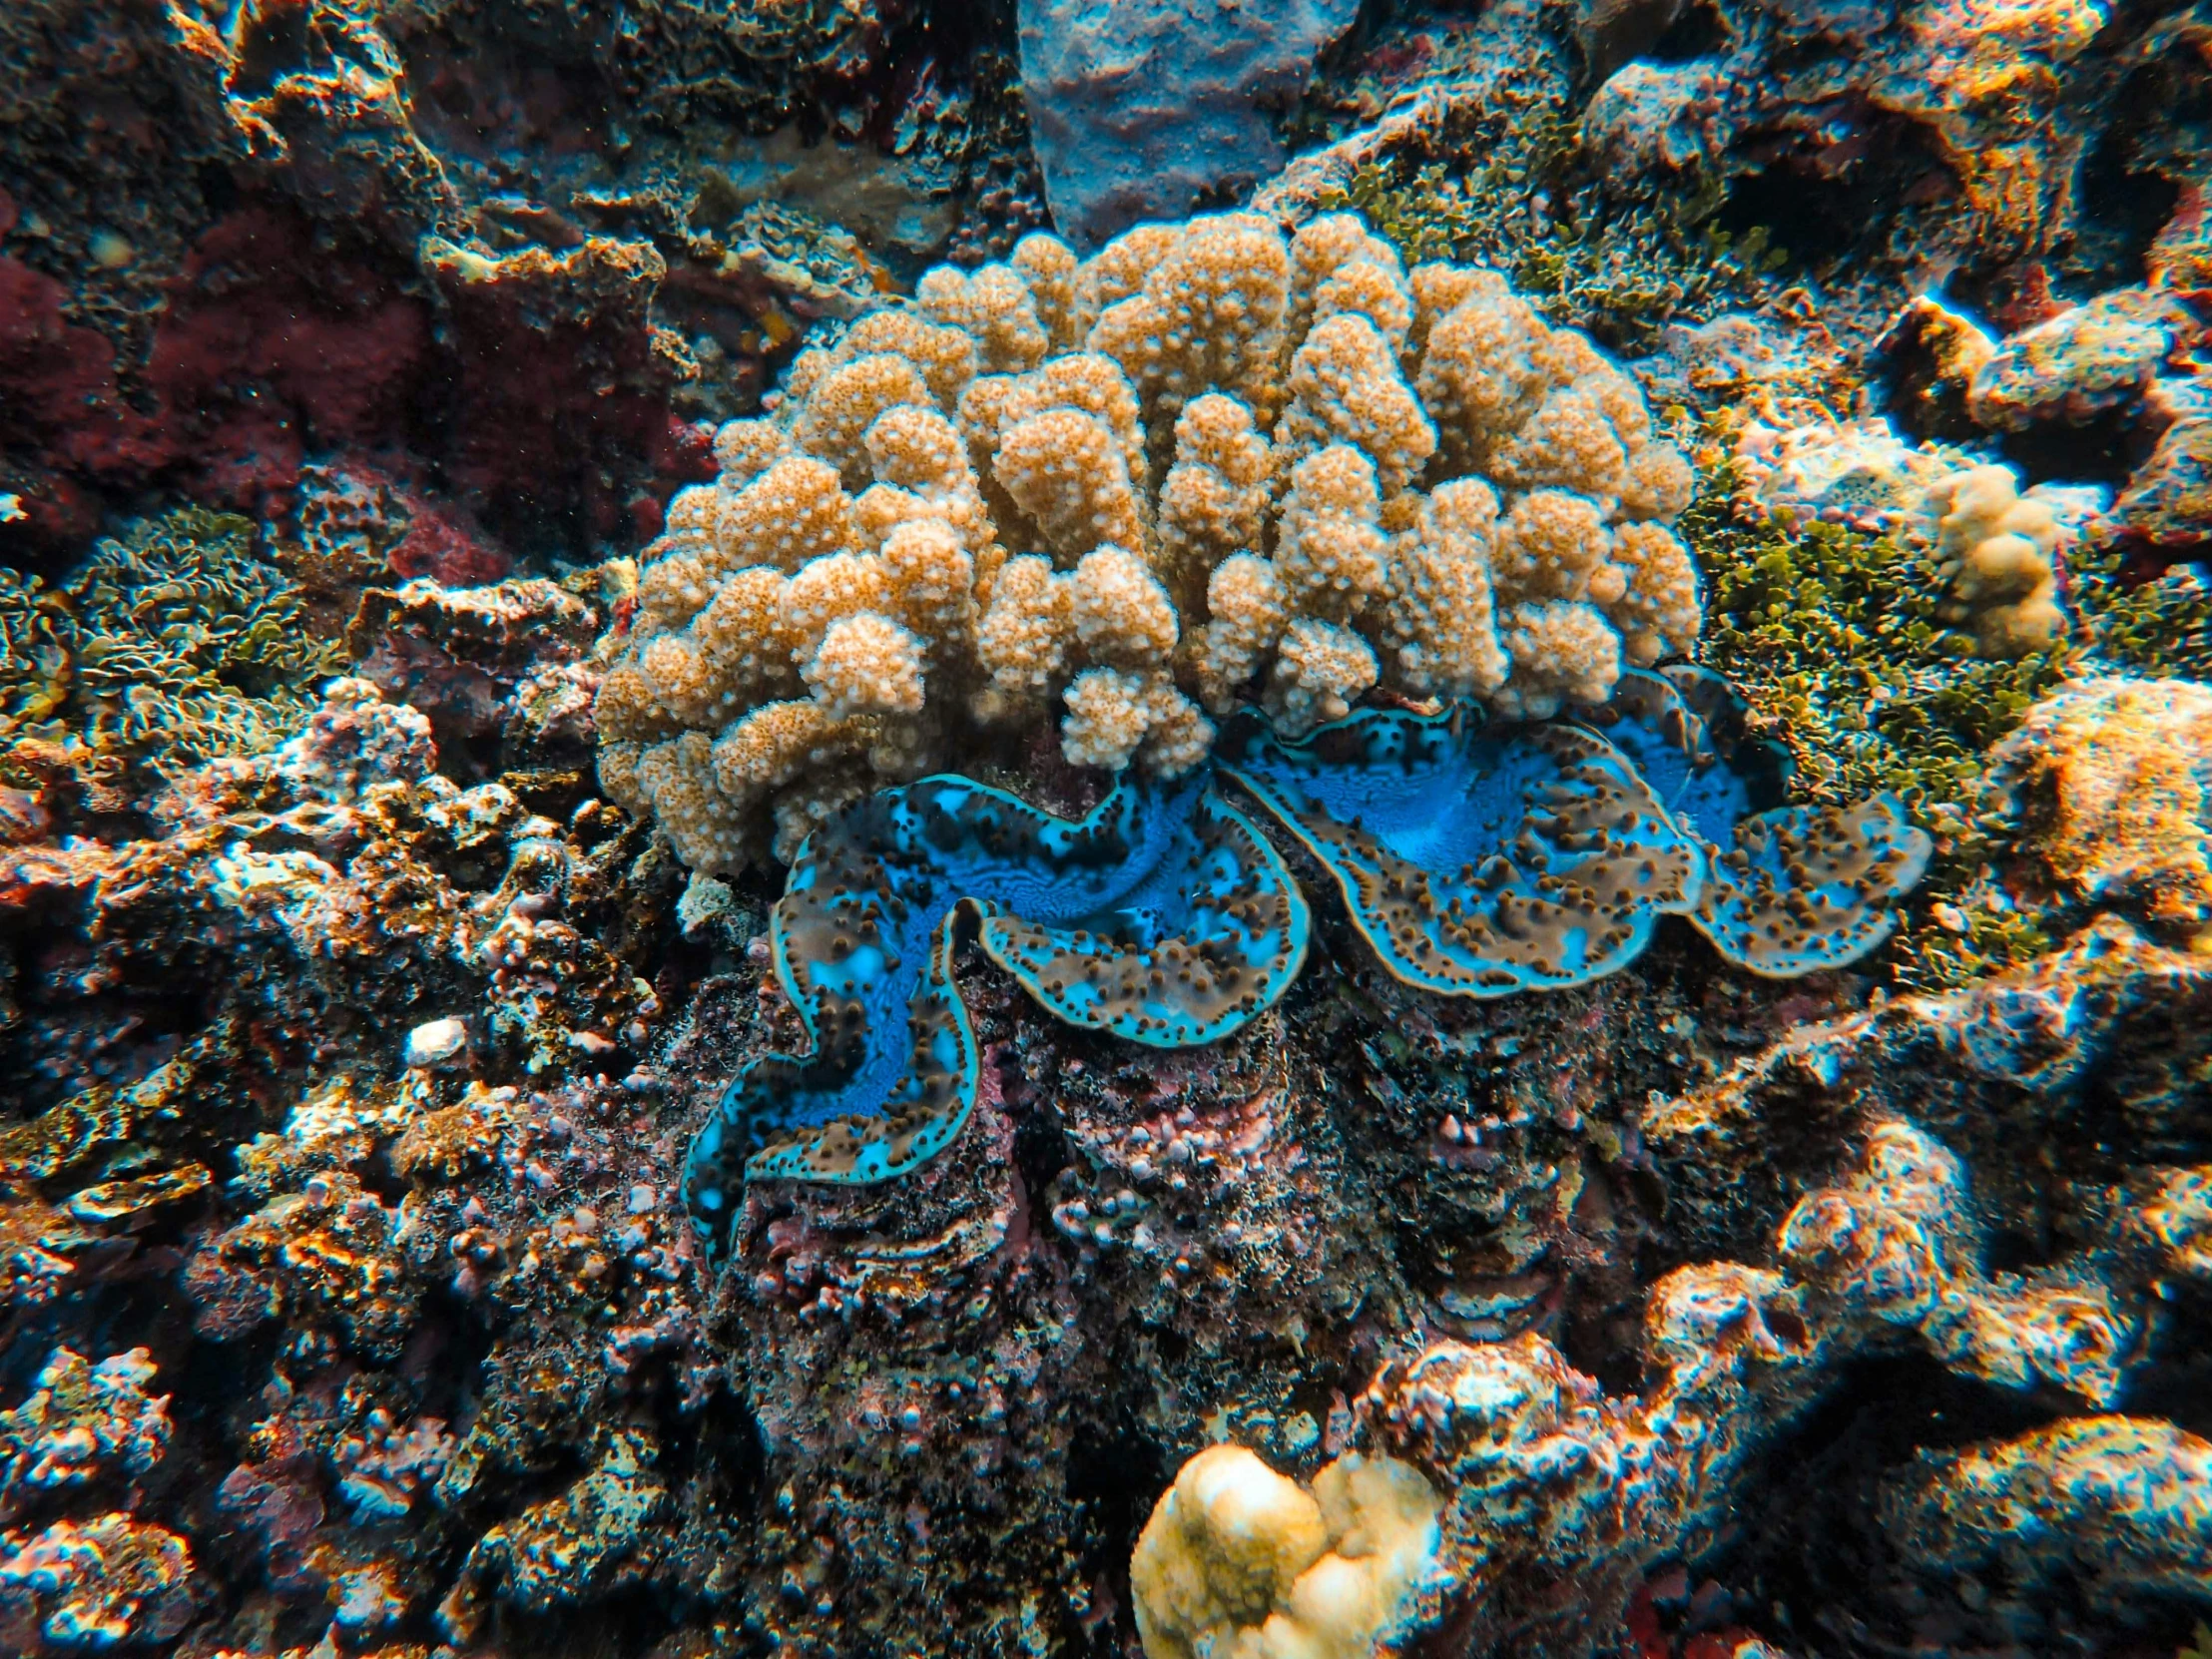 a coral covered in small blue and white bleaches